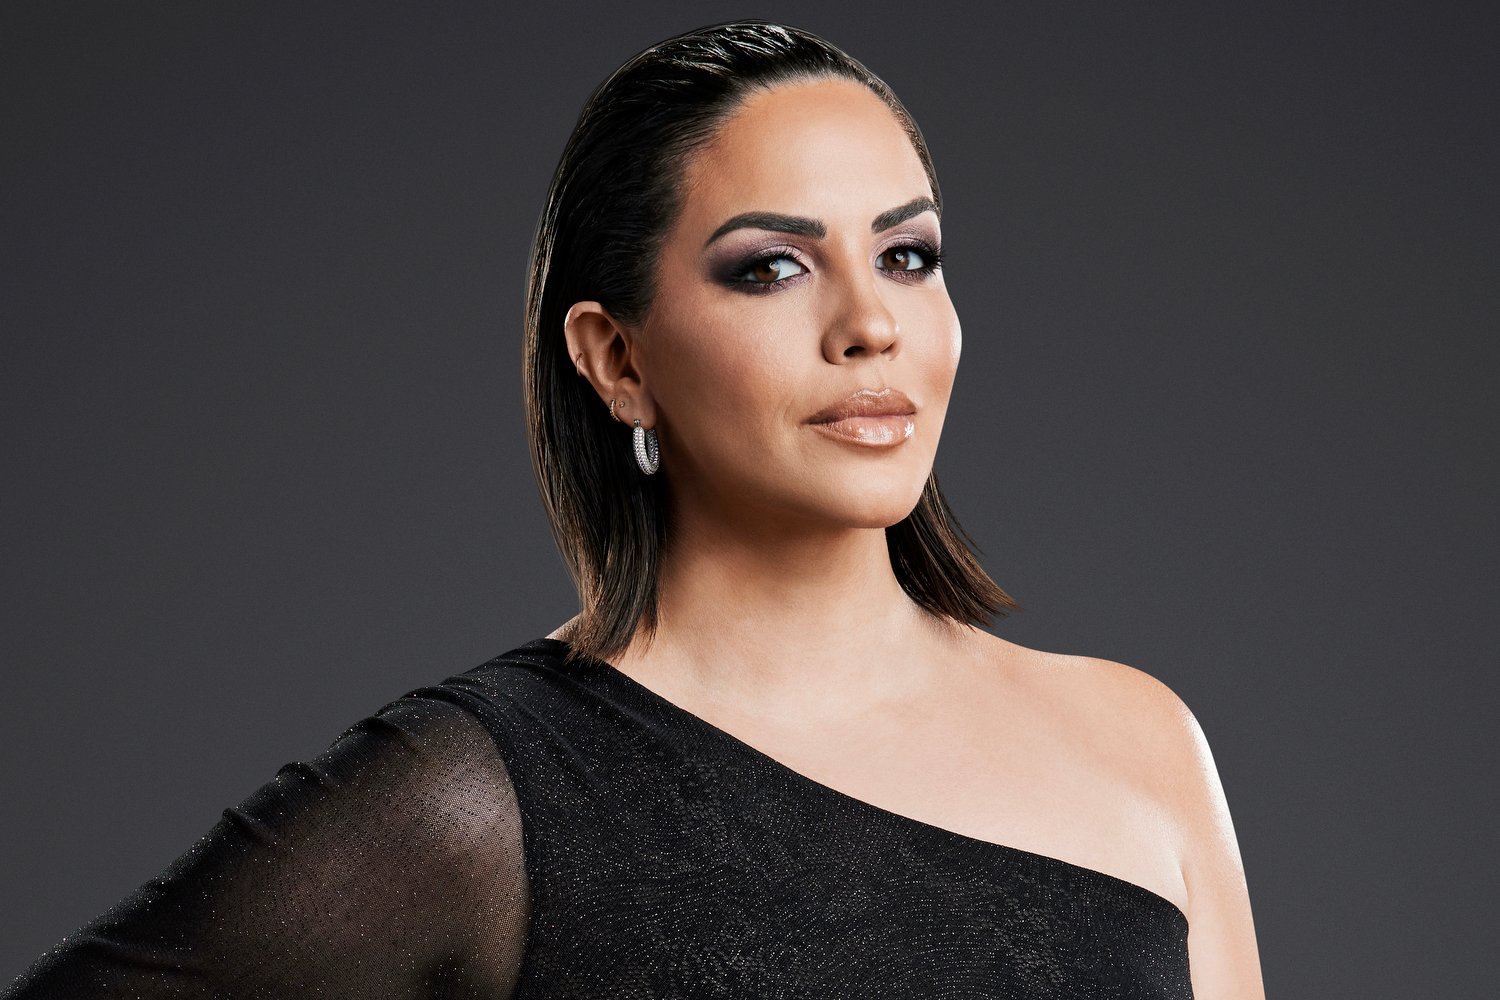 Katie Maloney poses for 'Vanderpump Rules' photoshoot wearing dark shades of makeup and sporting slicked back hair